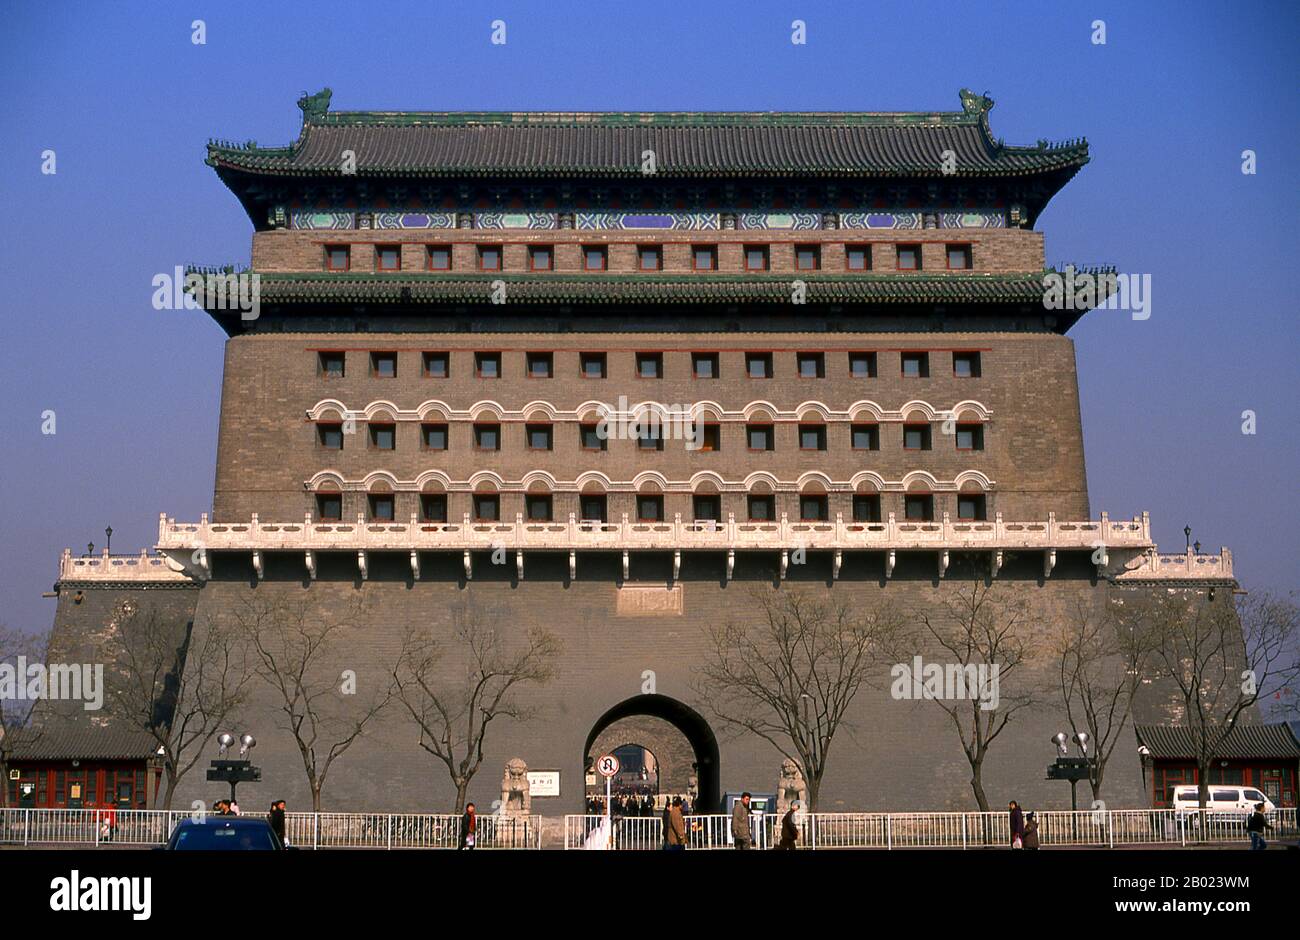 Zhengyangmen was first built in 1419 during the Ming Dynasty and once consisted of the gatehouse proper and an archery tower, which were connected by side walls and together with side gates, formed a large barbican. The gate guarded the direct entry into the imperial city.  During the Boxer Rebellion of 1900, the gate sustained considerable damage when the Eight-Nation Alliance invaded the city. The gate complex was extensively reconstructed in 1914. The Barbican side gates were torn down in 1915.  After the Communist victory in 1949, the Zhengyangmen gatehouse was occupied by the Beijing garr Stock Photo